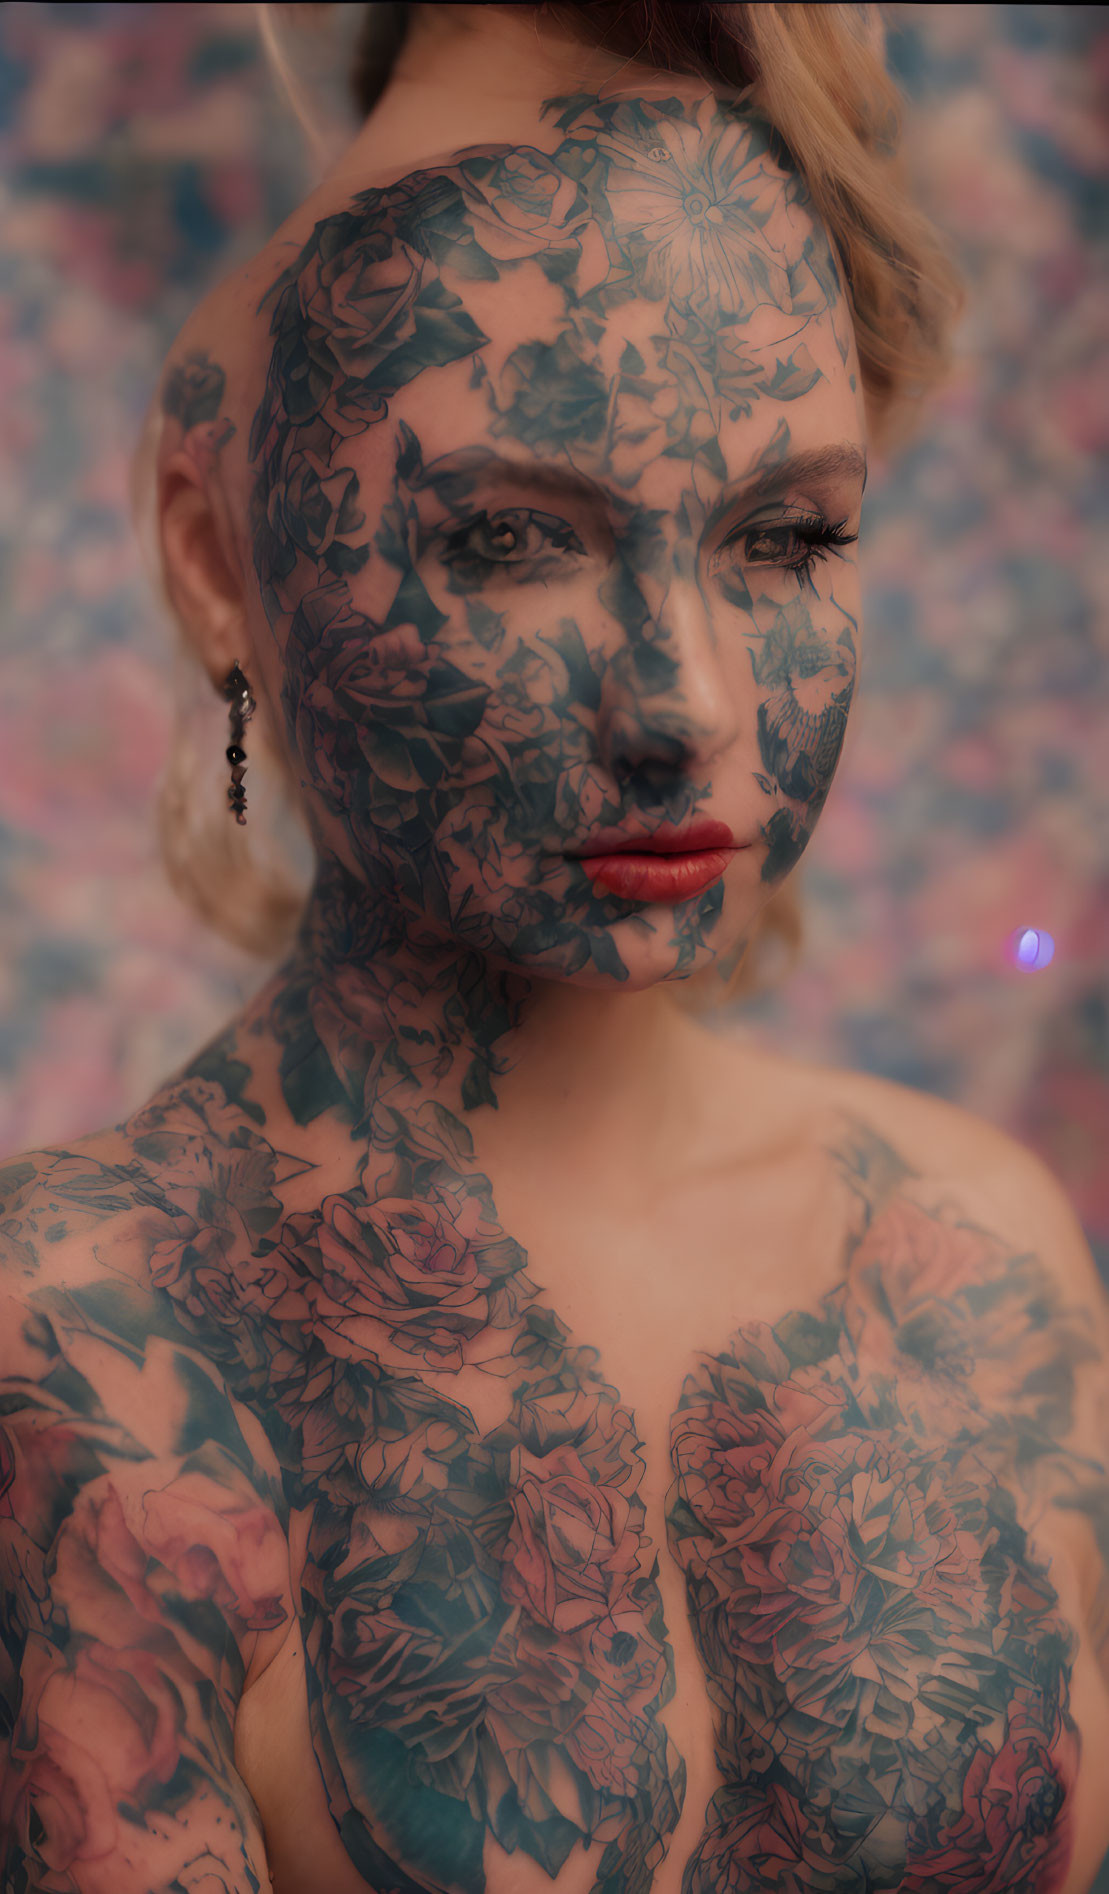 Floral tattoos on person against complementary background